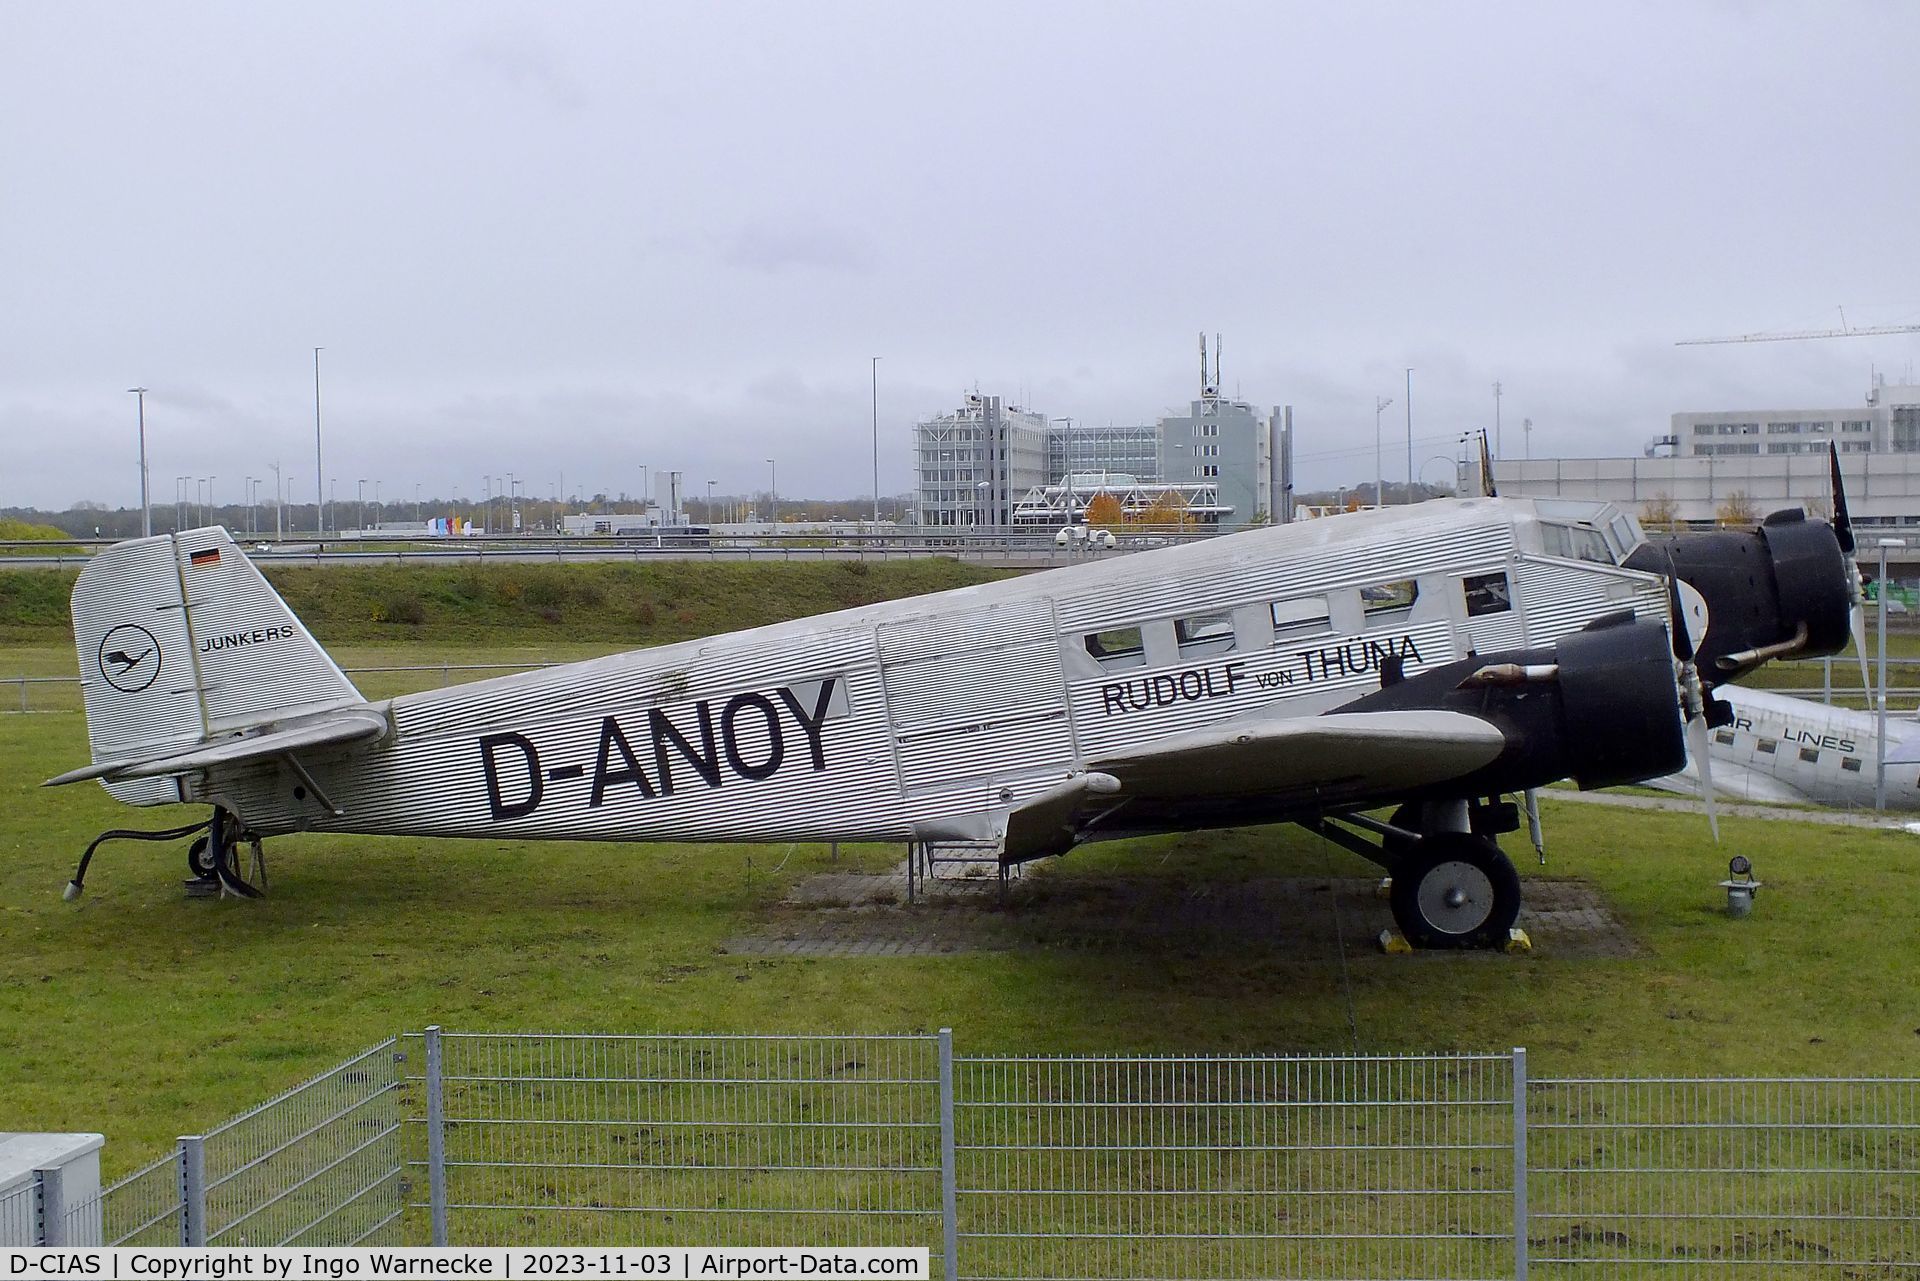 D-CIAS, Junkers (CASA) 352L (Ju-52) C/N 54, CASA 352L (Junkers Ju 52/3m), displayed to represent 'D-ANOY' a Junkers Ju 52/3m of Lufthansa that made the first flight from Berlin to China across the Pamir mountains in 1937, at the visitors park of Munich international airport (Besucherpark)